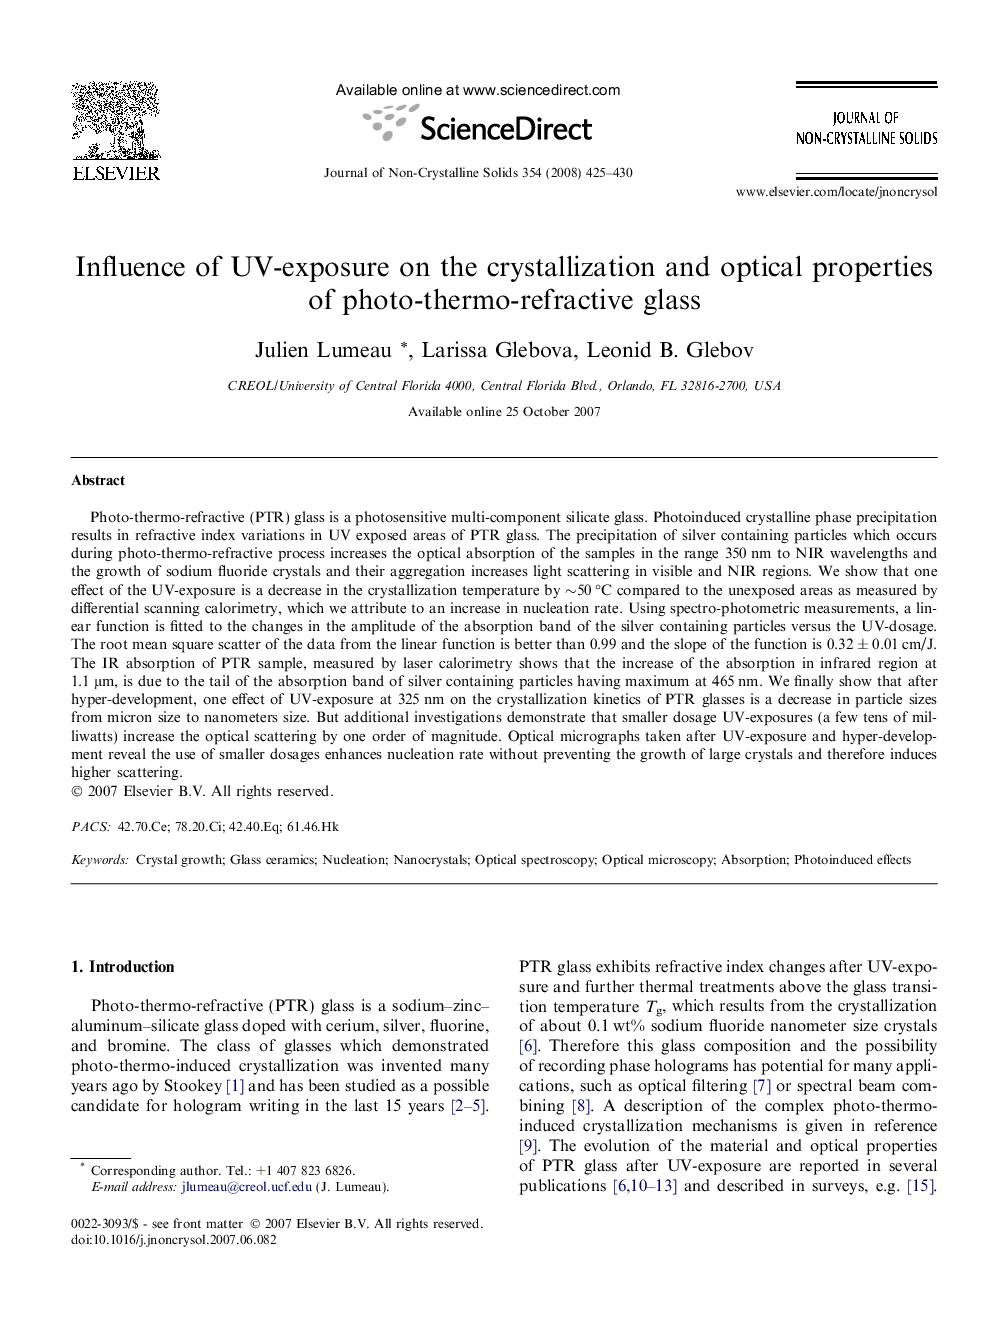 Influence of UV-exposure on the crystallization and optical properties of photo-thermo-refractive glass